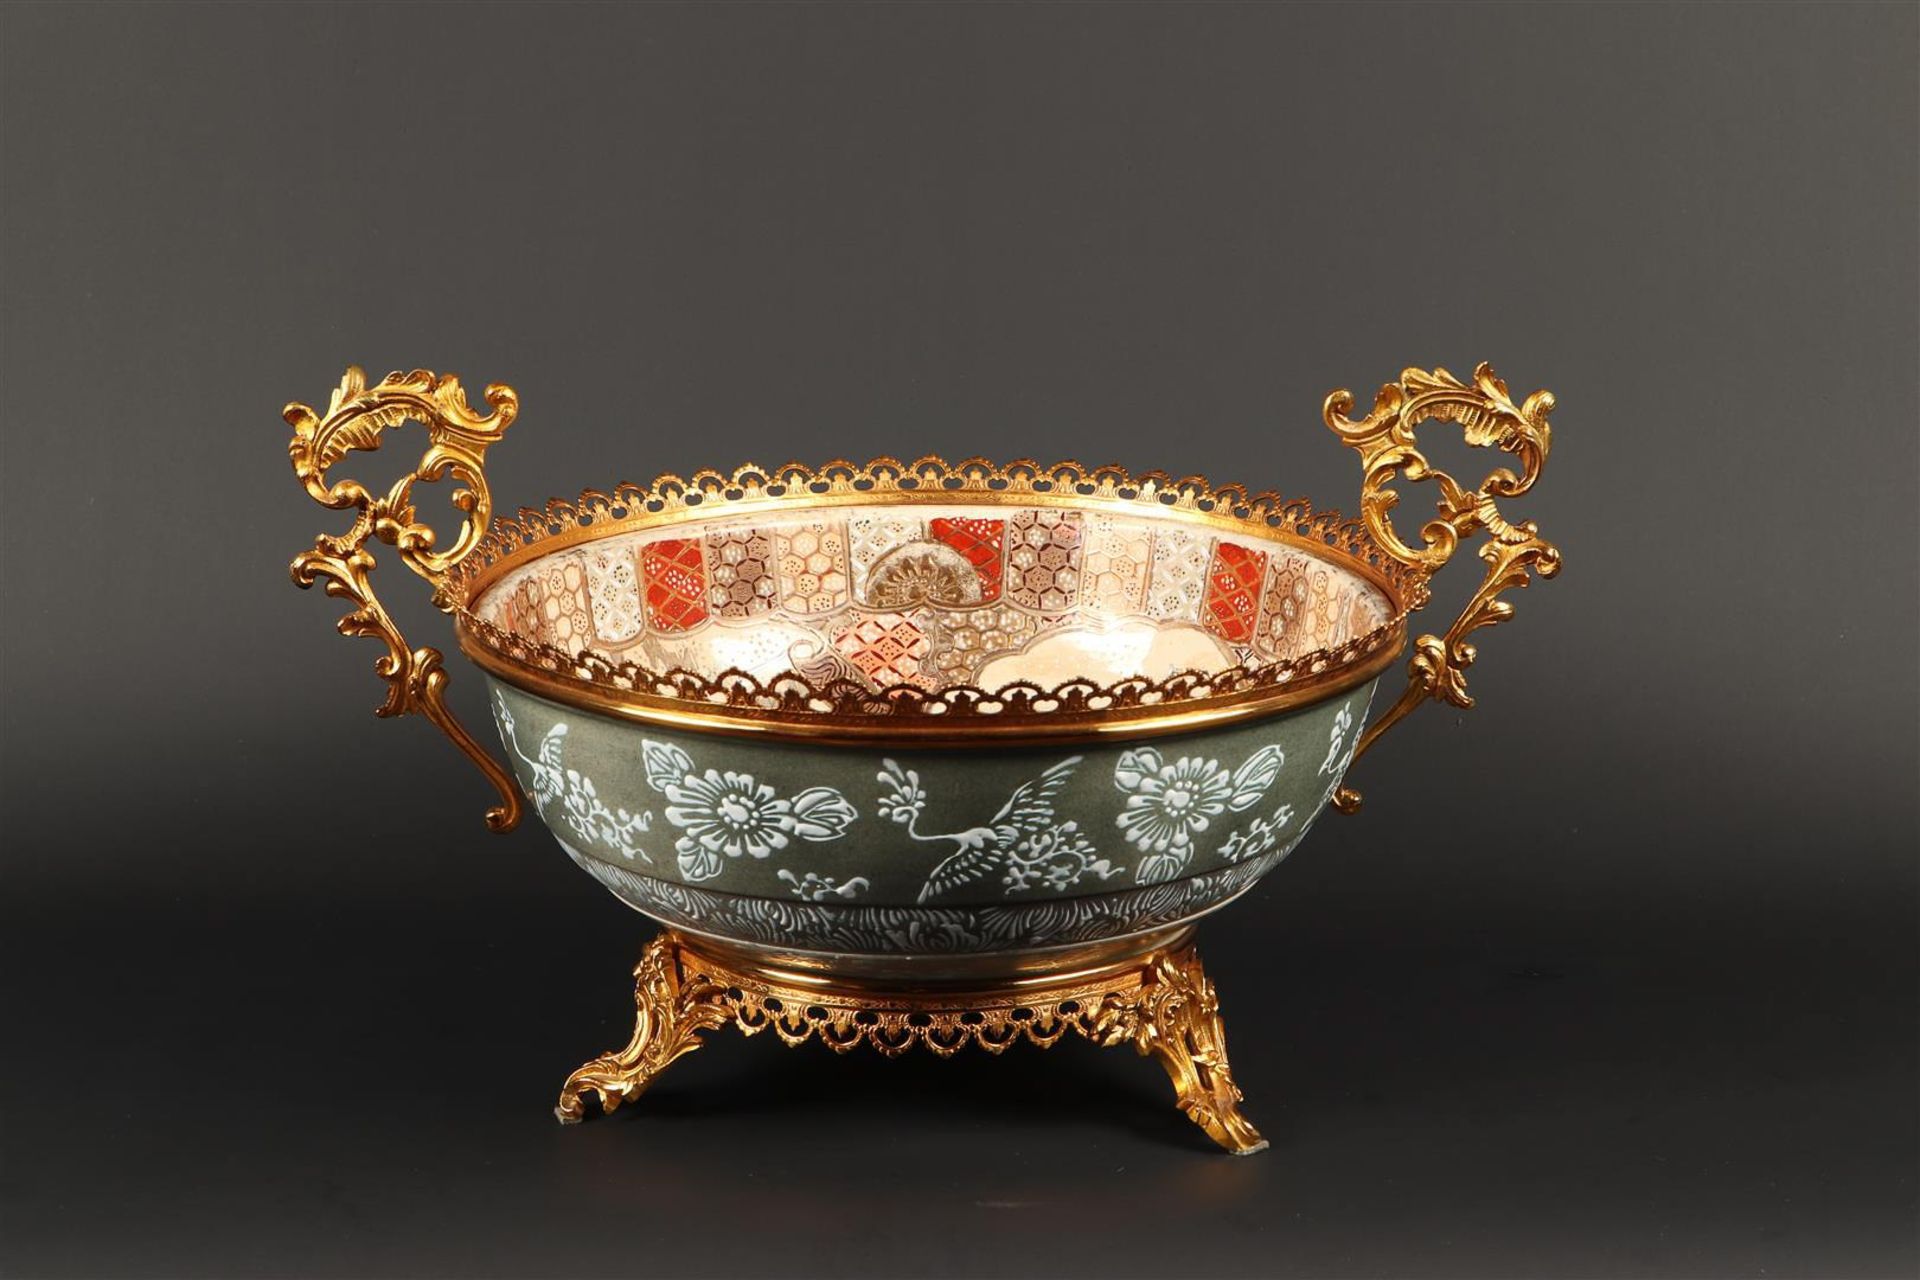 A Satsuma earthenware bowl in brass frame, inside decorated with various figures. Japan, 1st half 20